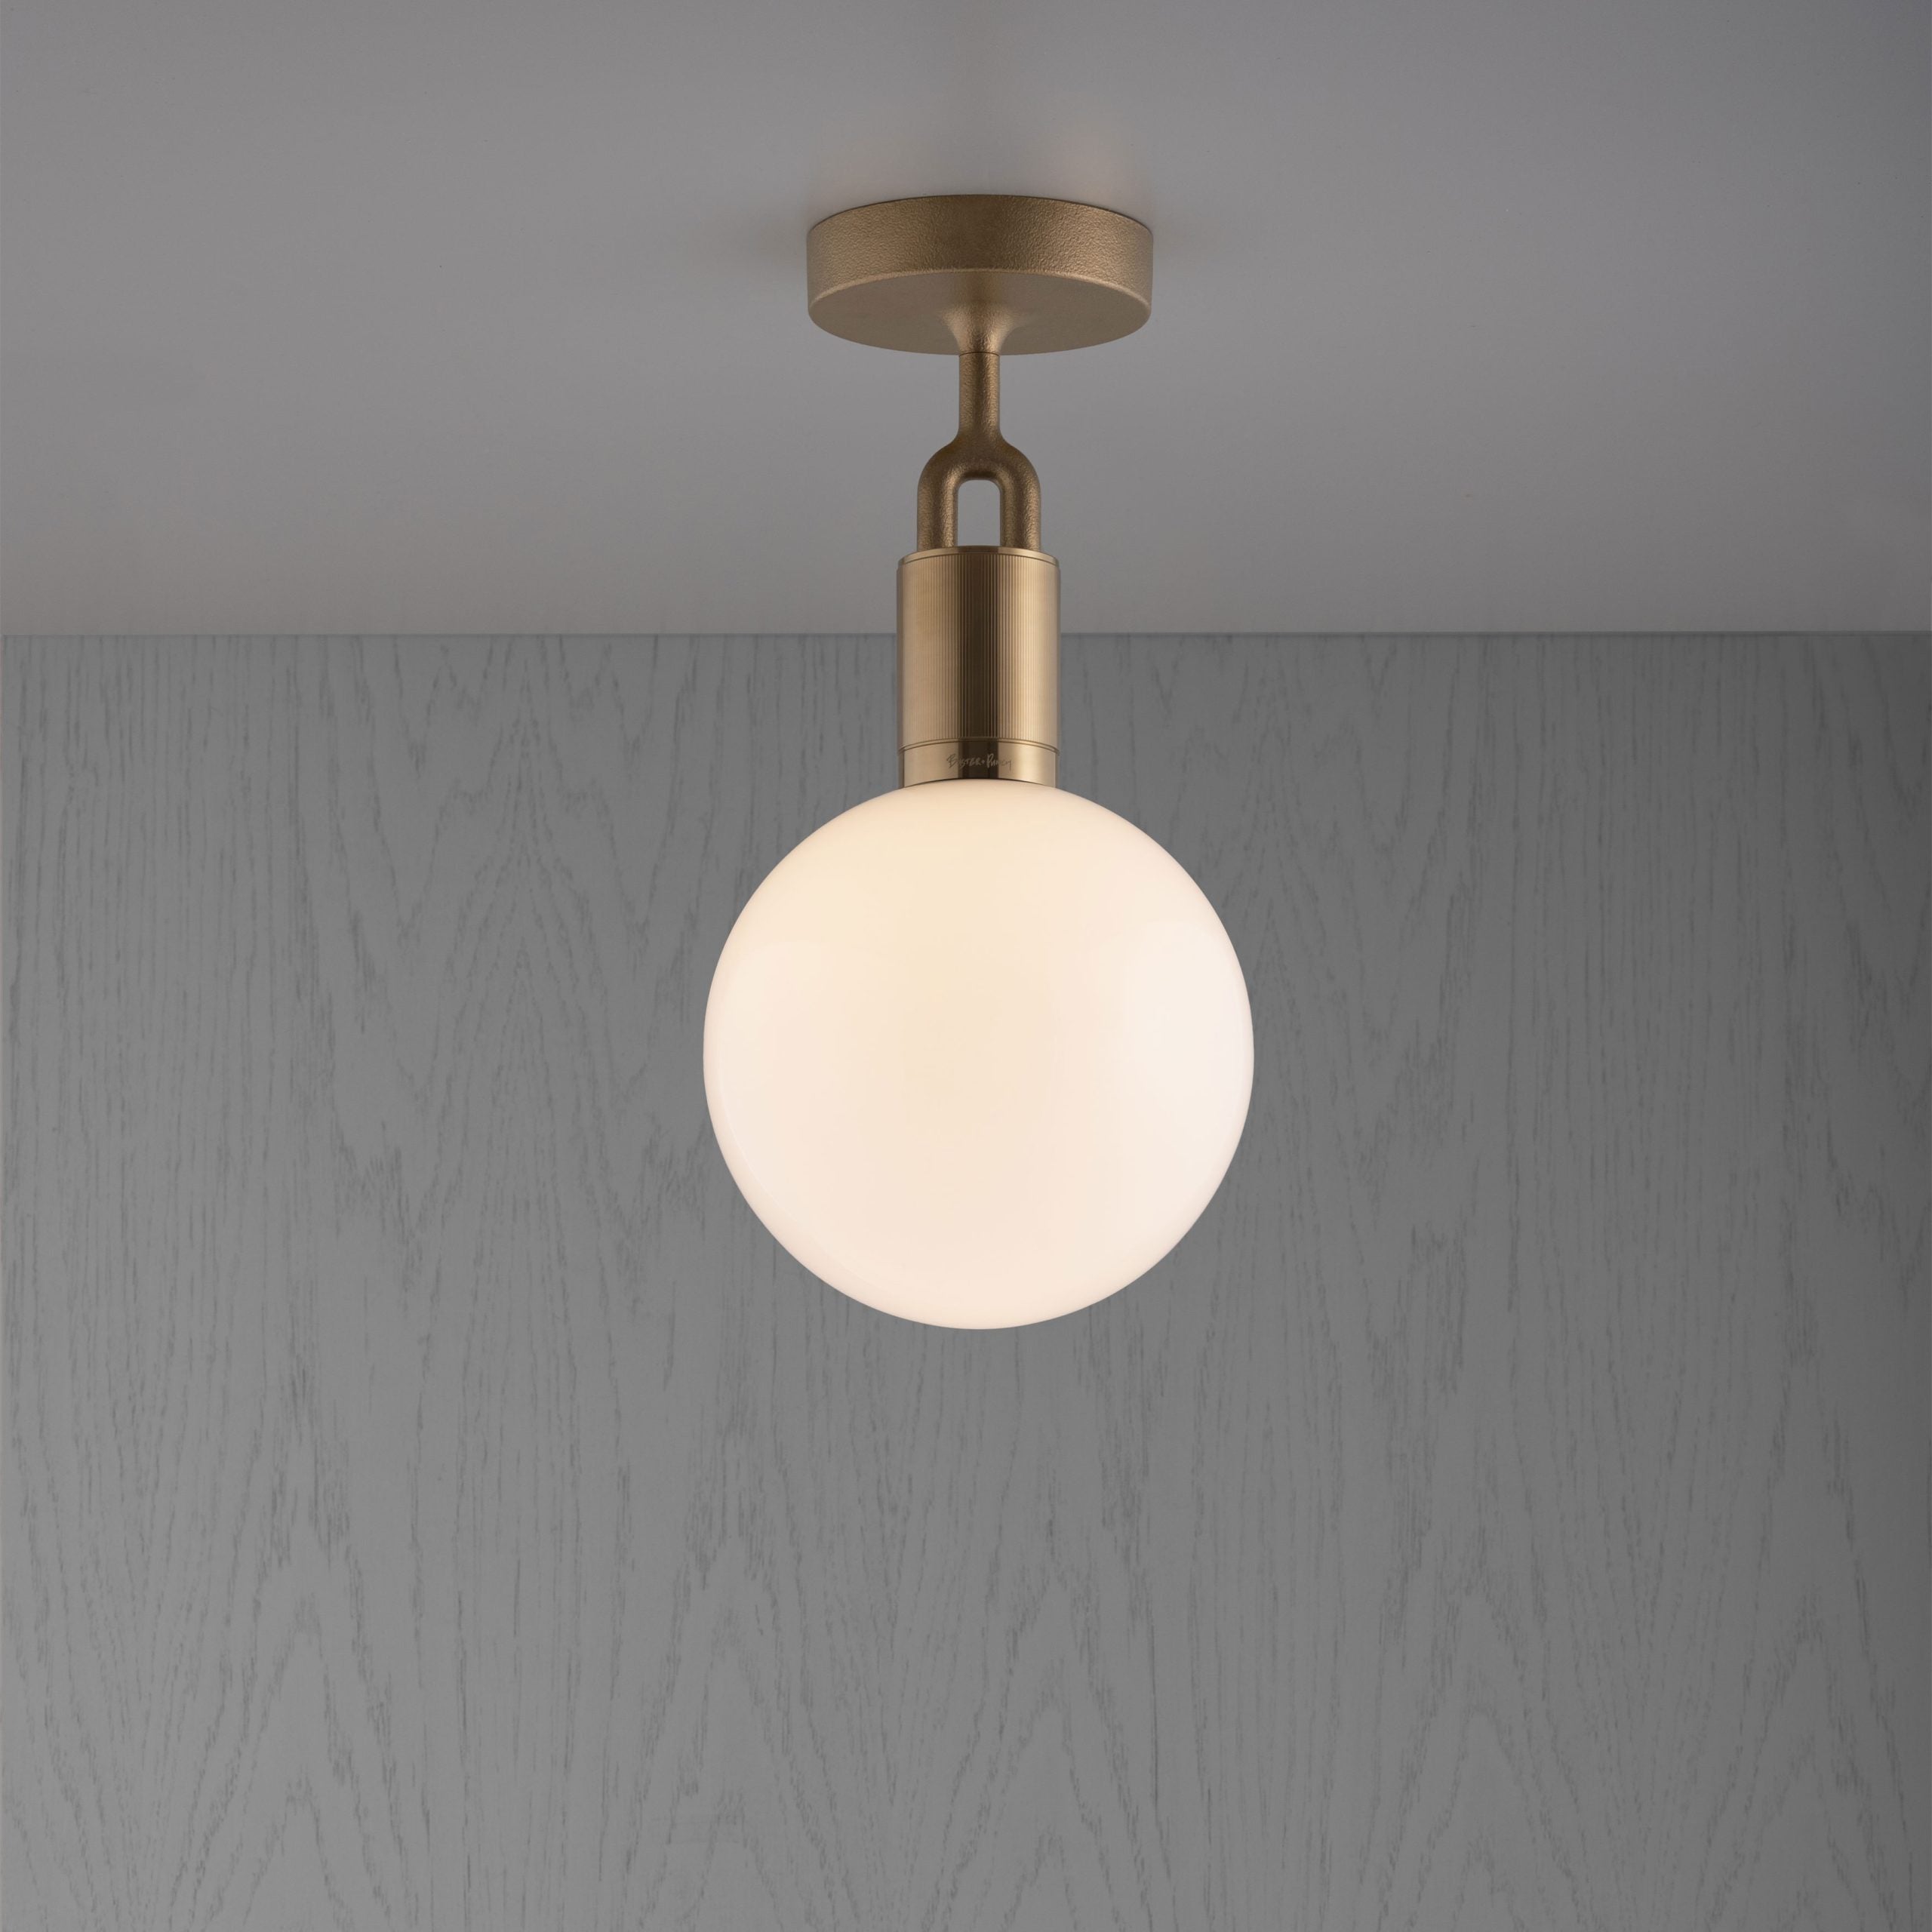 Buster + Punch - NFC-823205 - Forked Ceiling - Globe  - Forked - Brass 